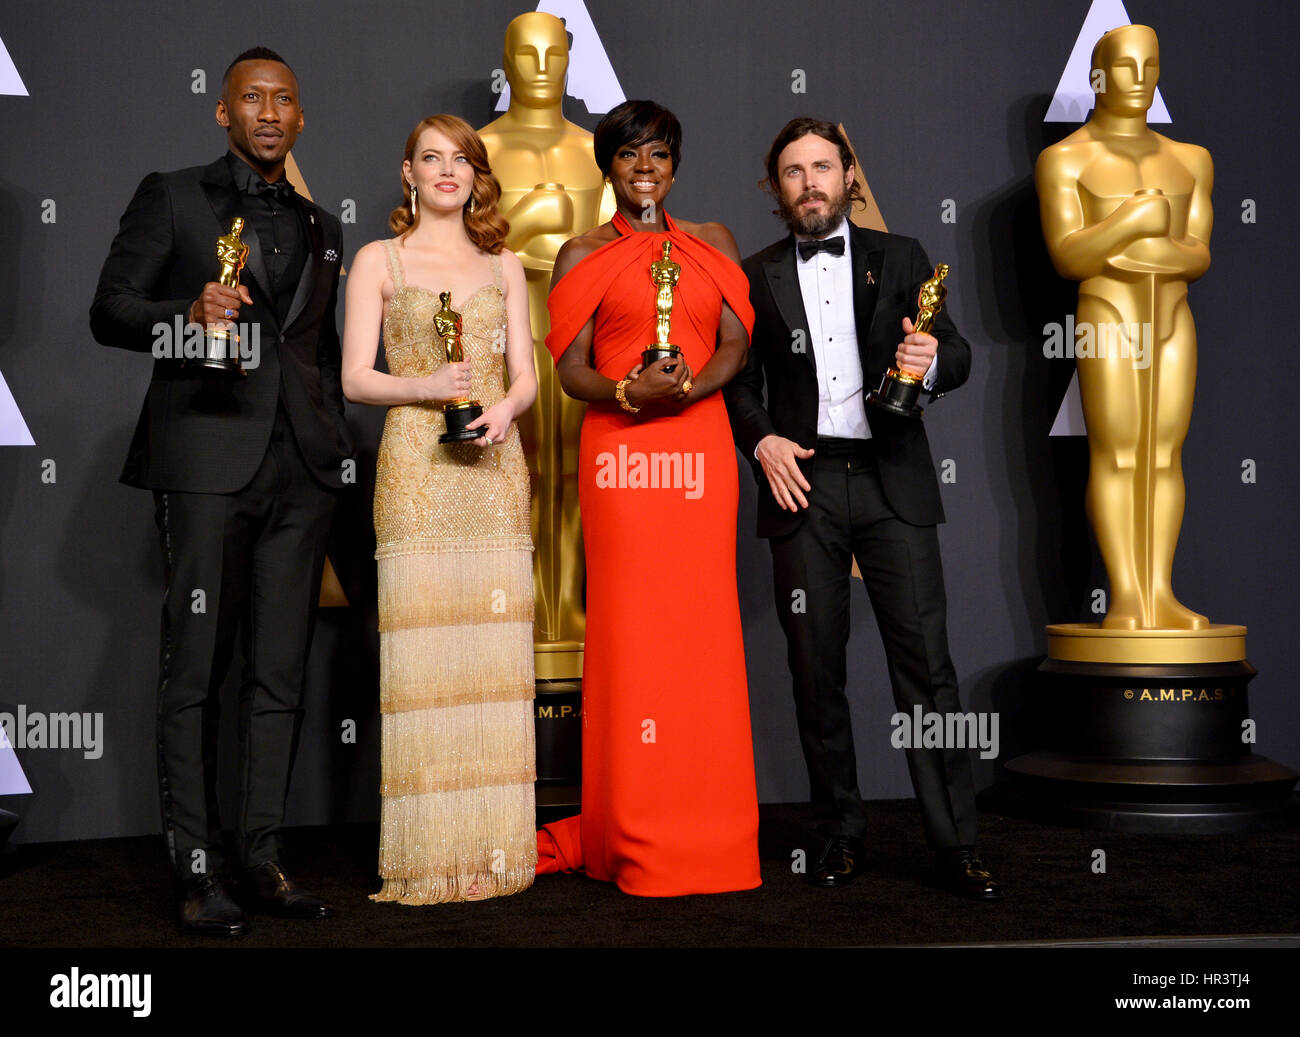 LOS ANGELES, CA. February 26, 2017: Mahershala Ali, Emma Stone, Viola Davis & Casey Affleck in the photo room at the 89th Annual Academy Awards at the Dolby Theatre, Los Angeles.   Stock Photo